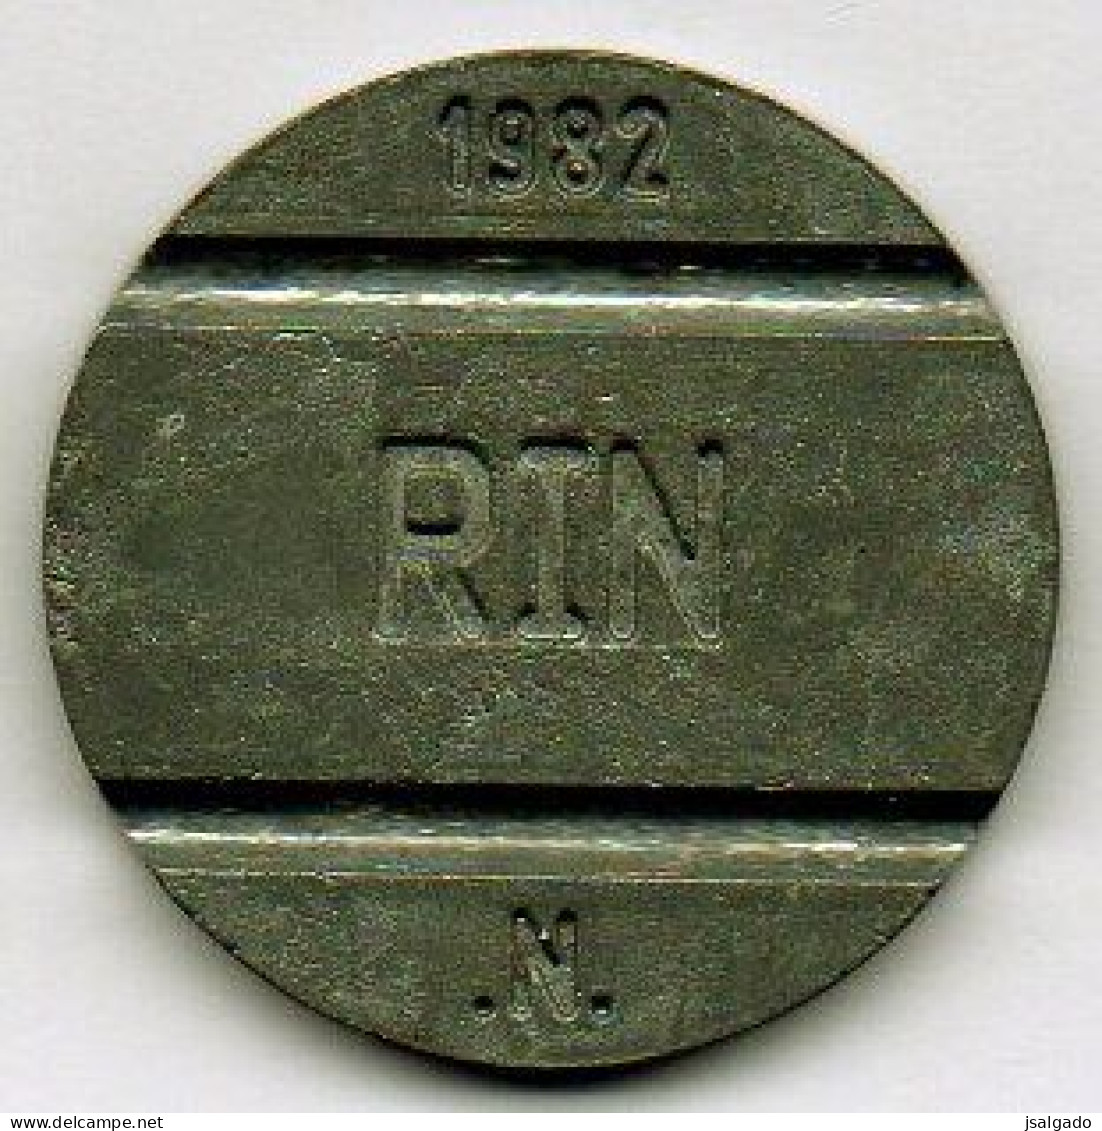 Perú  Telephone Token    1982  (g)  RIN  (g)  .N. With Two Dots   /  CPTSA  (g)  Telephone In Circle - Notgeld